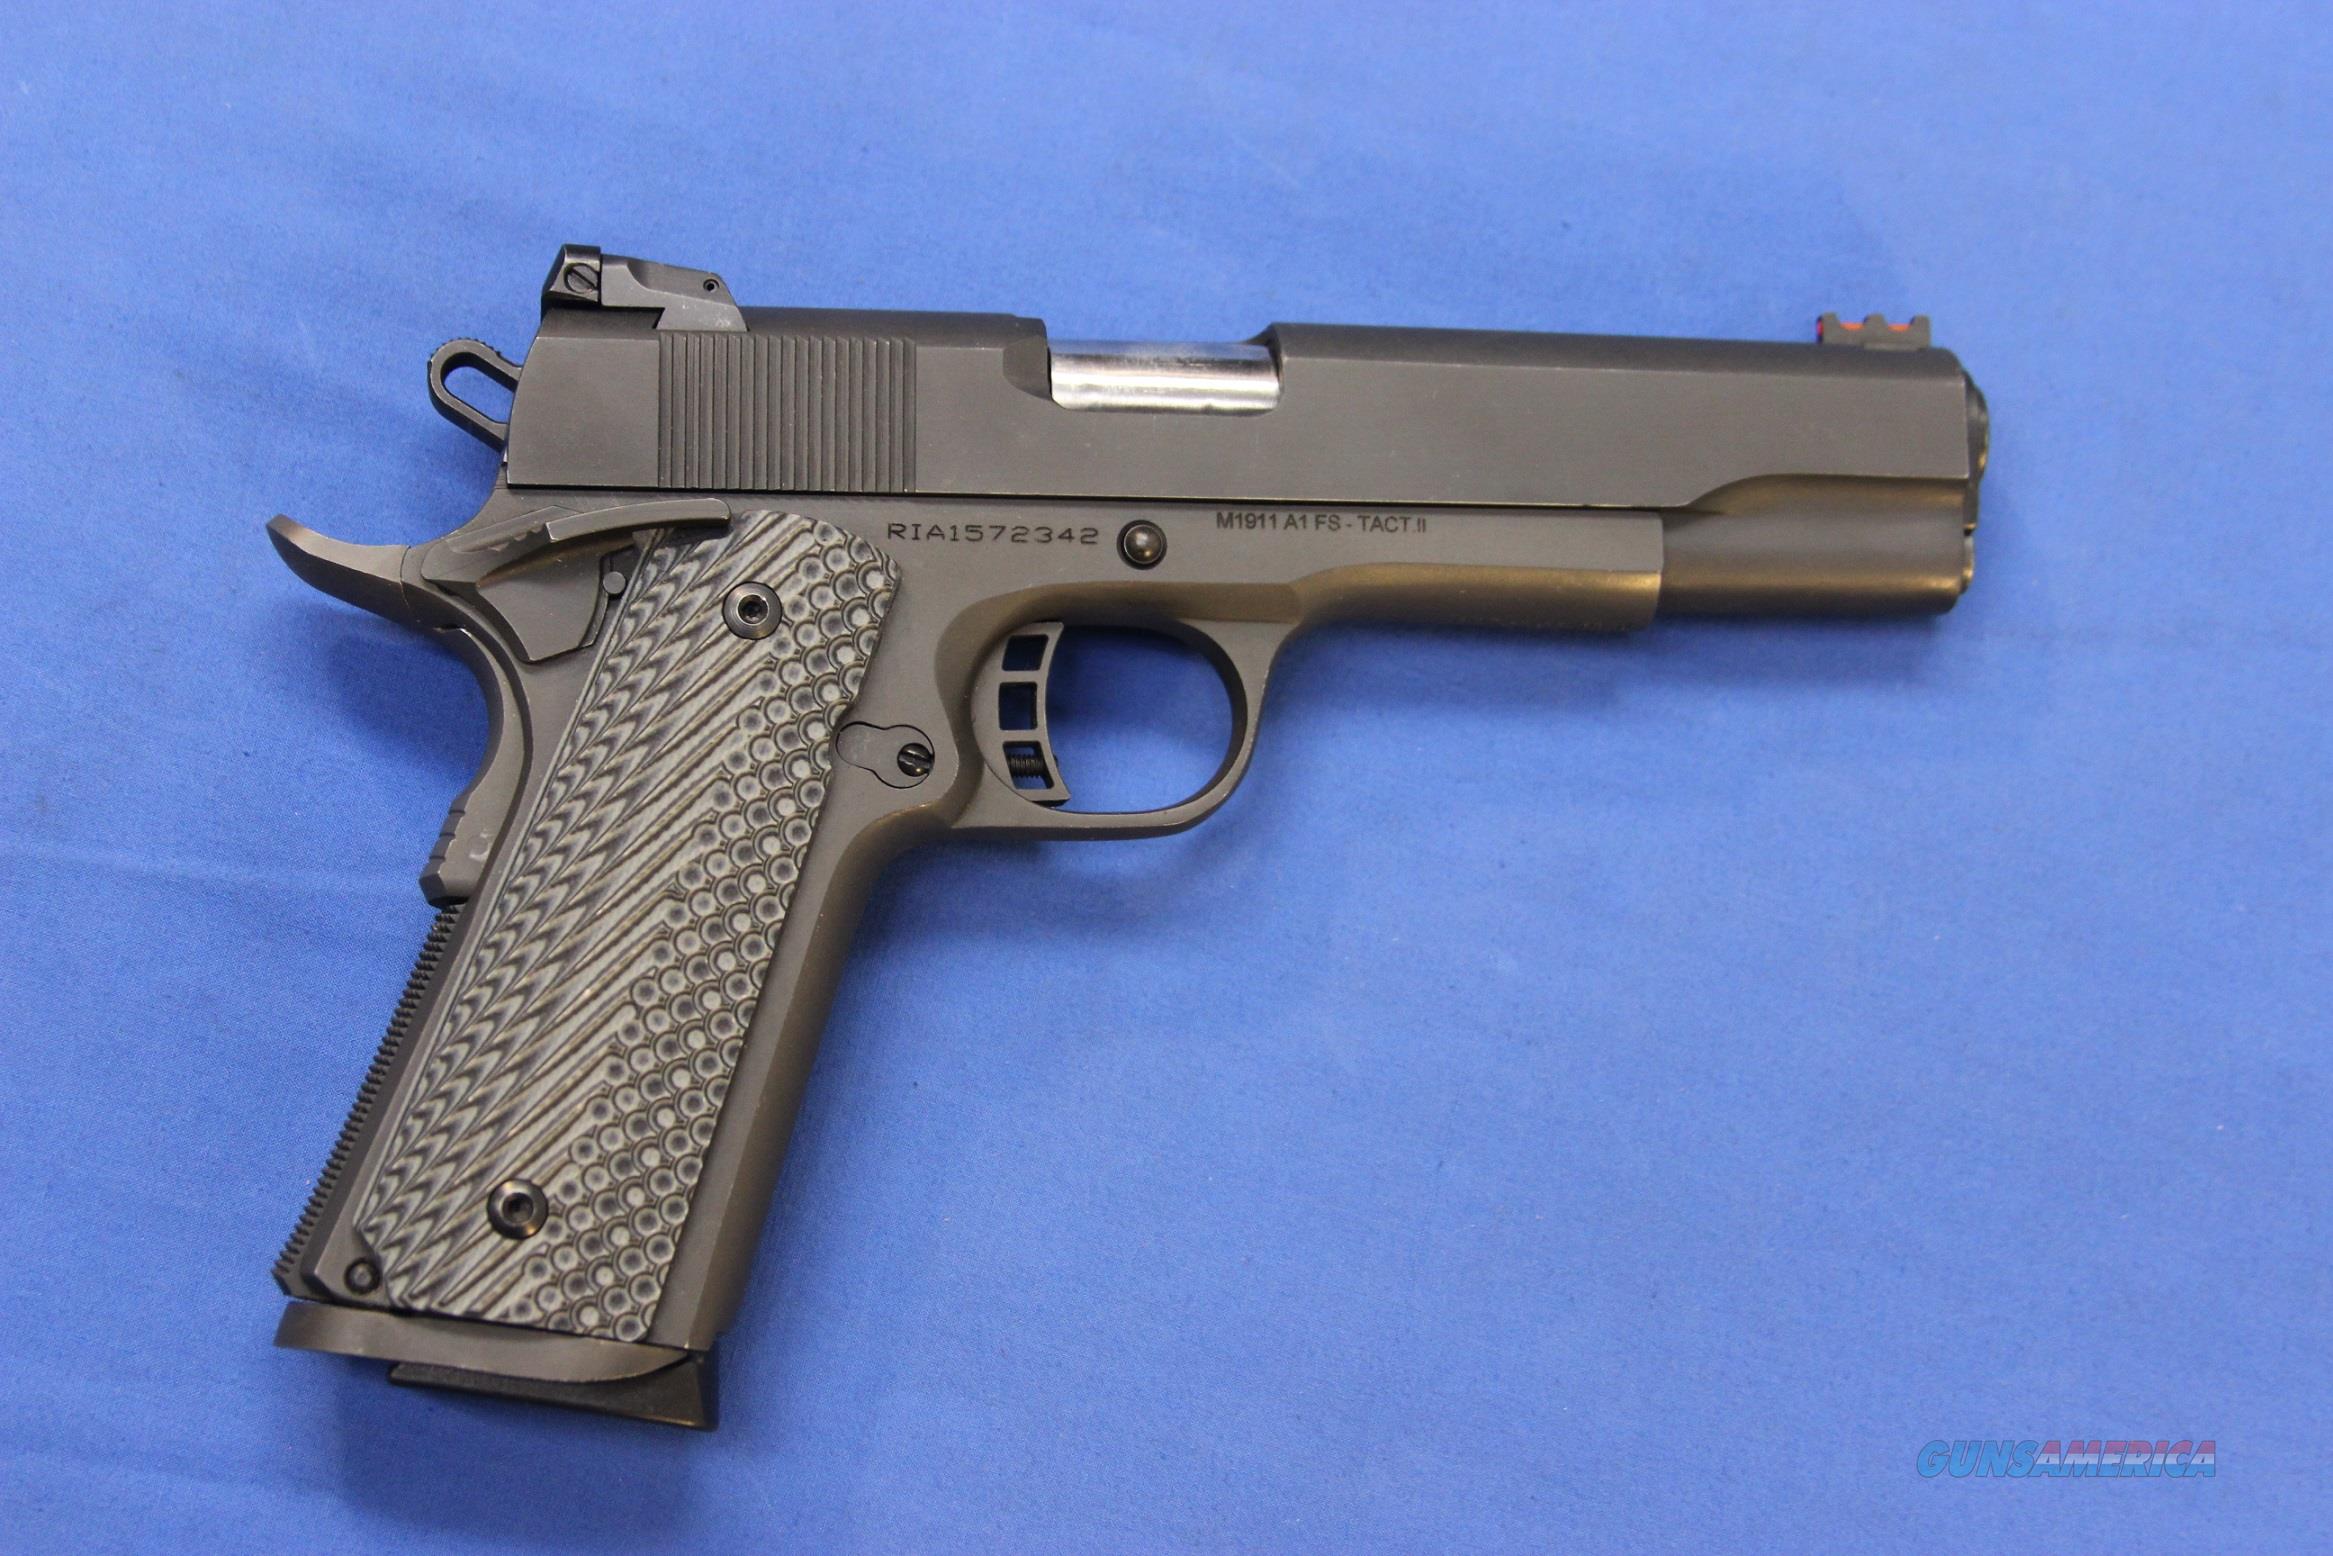 Rock Island Armory 1911 A1 Fs Tacti For Sale At 986535394 5440